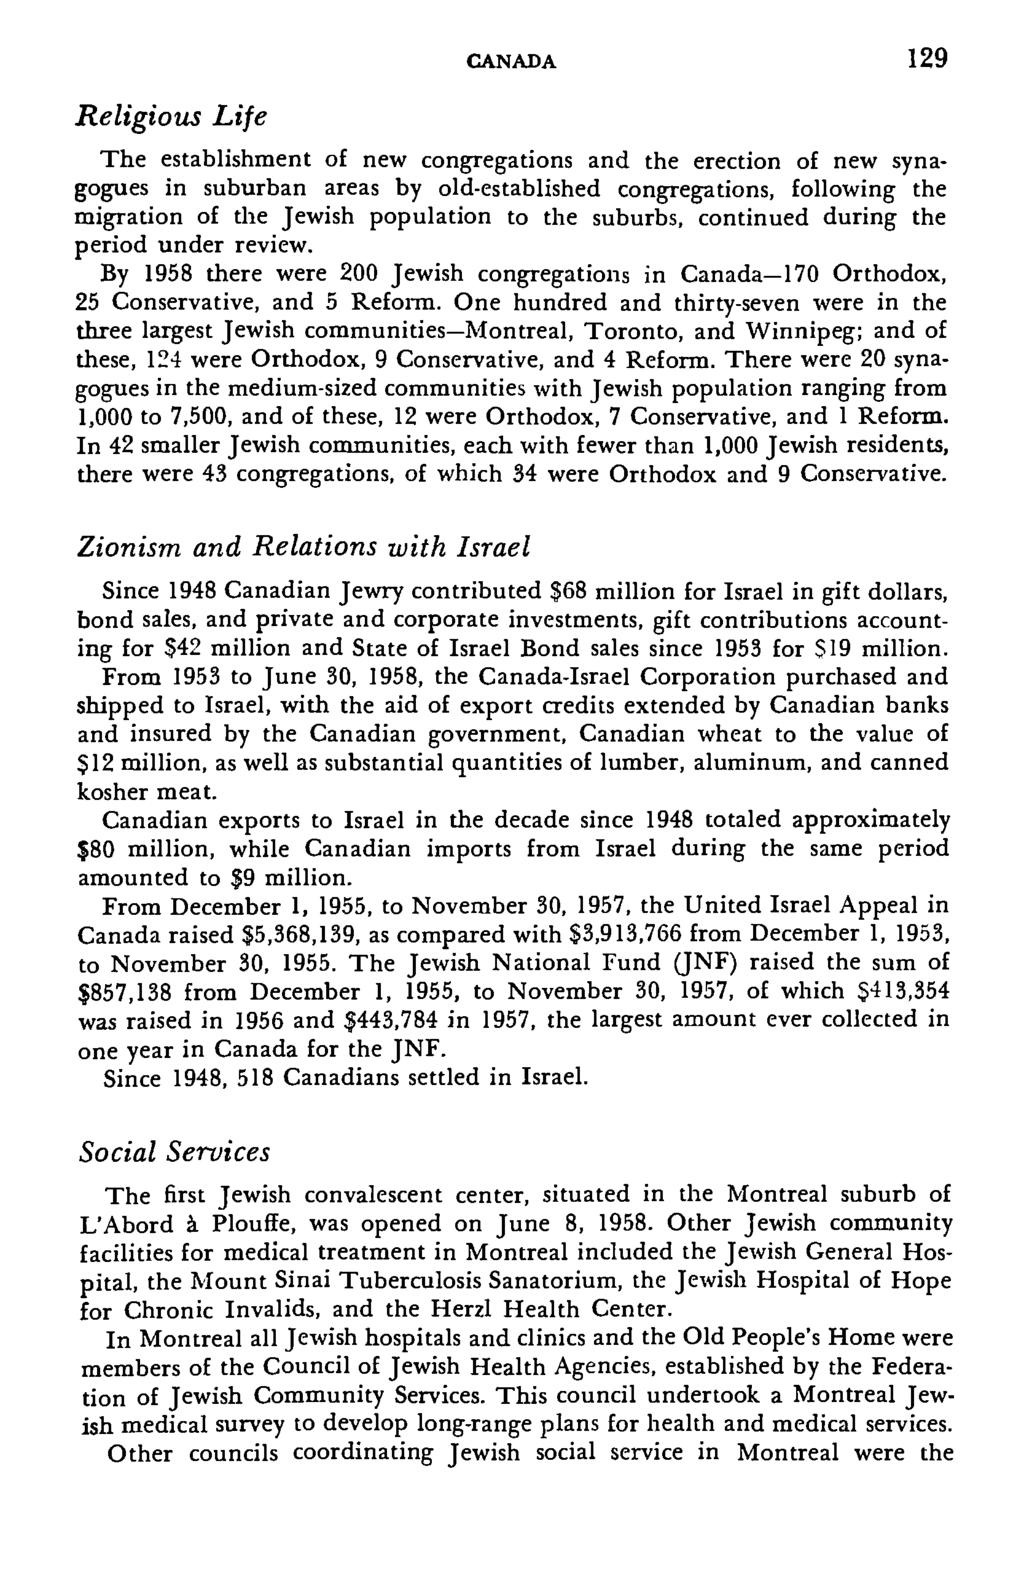 Religious Life CANADA 129 The establishment of new congregations and the erection of new synagogues in suburban areas by old-established congregations, following the migration of the Jewish